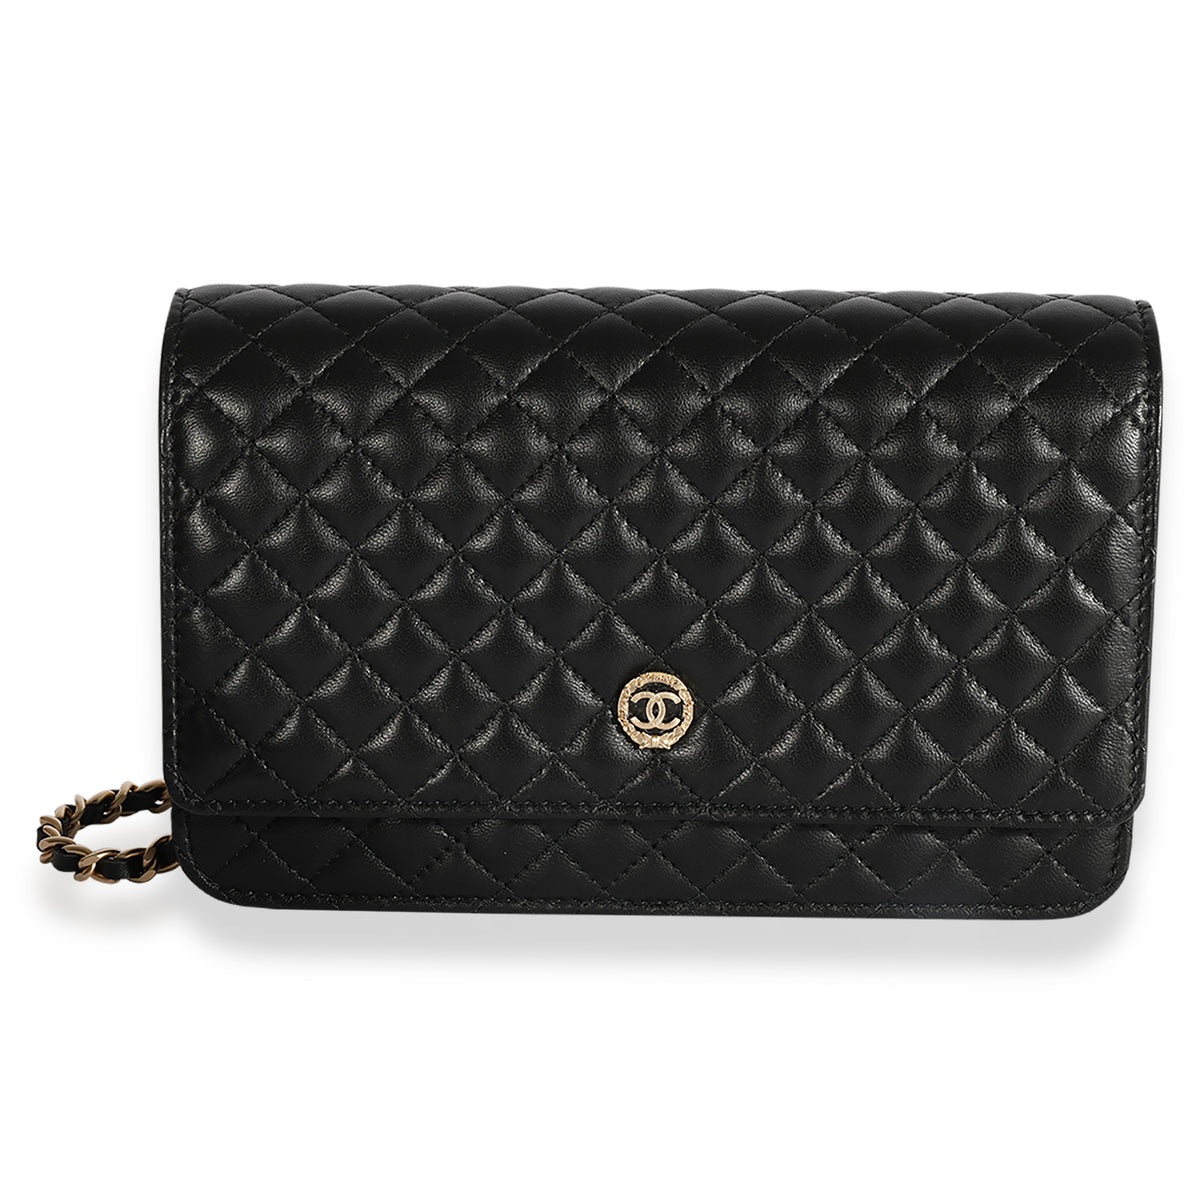 Chanel Black Quilted Lambskin Chanel Crest Wallet On Chain, myGemma